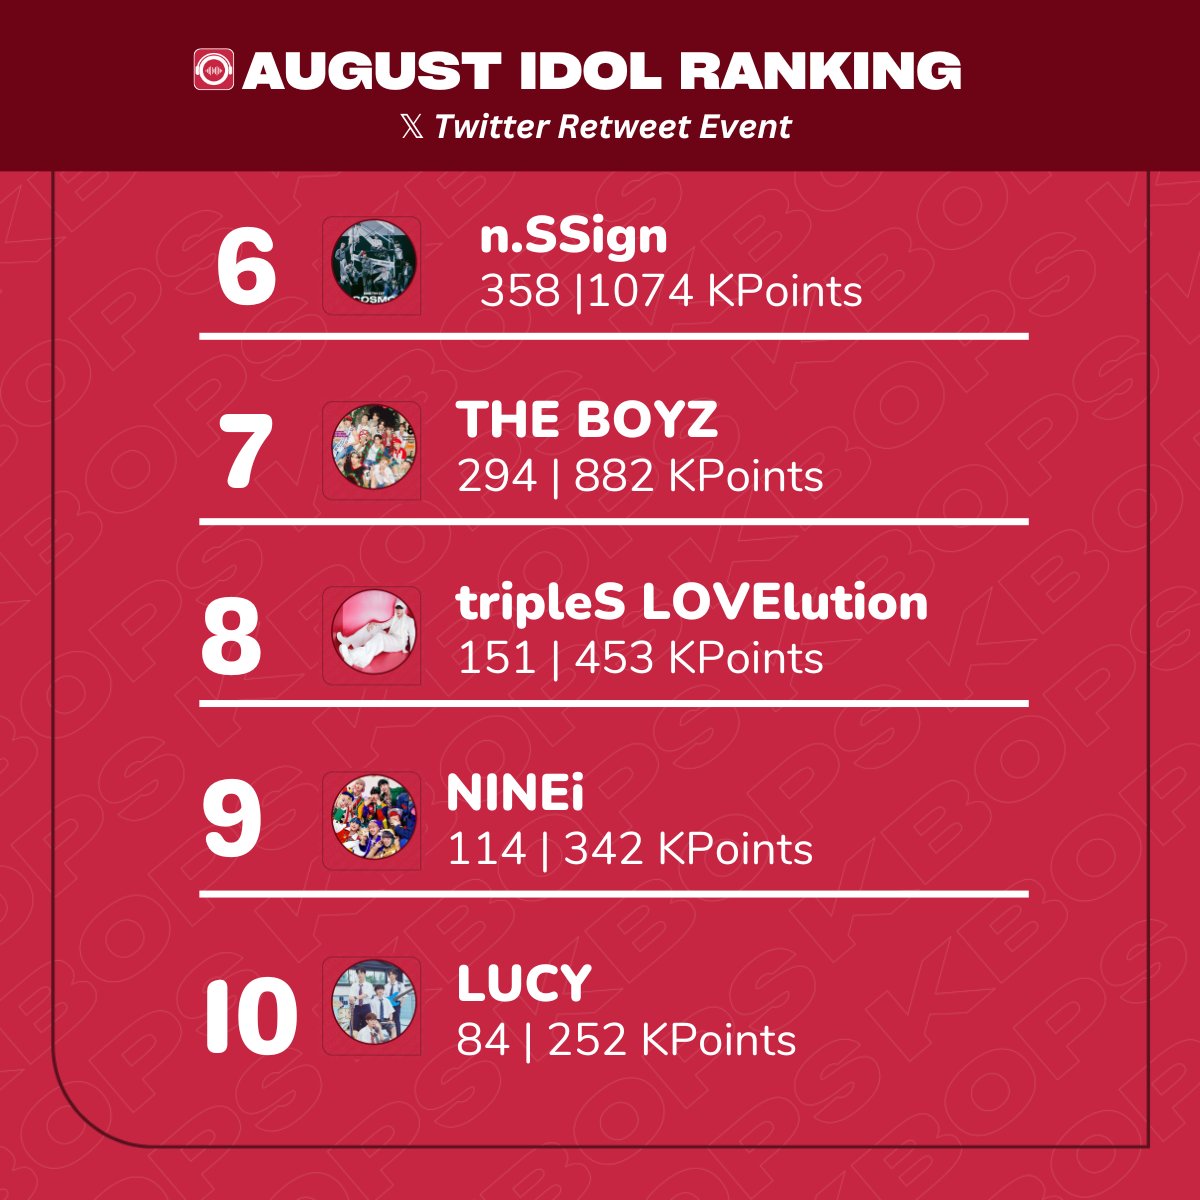 #kBOPS : August IDOL of the Month!

𝕏 Twitter/ Retweet Event

Final KPoints acquired as of 08.07 12:00 PM KST!

❶ #LEV
❷ #TIOT
❸ #jhope
❹ #EVERGLOW 
❺ #MAMAMOOplus
❻ #nSSign
❼ #THEBOYZ
❽ #tripleS #LOVElution
❾ #NINEi
❶⓪ #LUCY

✔︎Votes will be added 08.08 1:00 AM KST